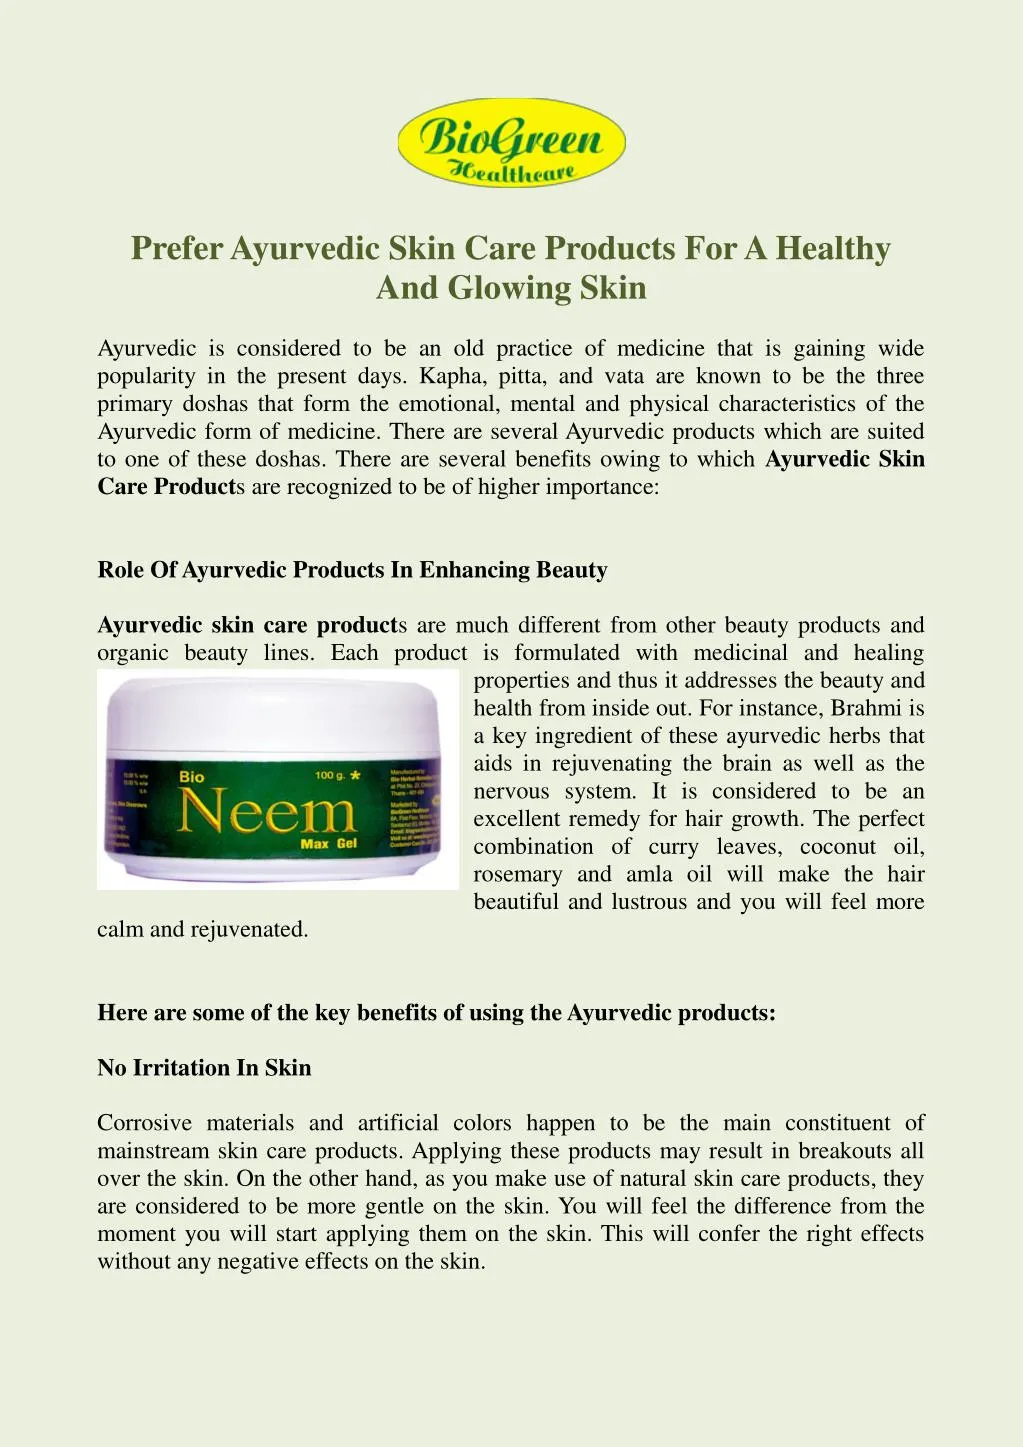 prefer ayurvedic skin care products for a healthy